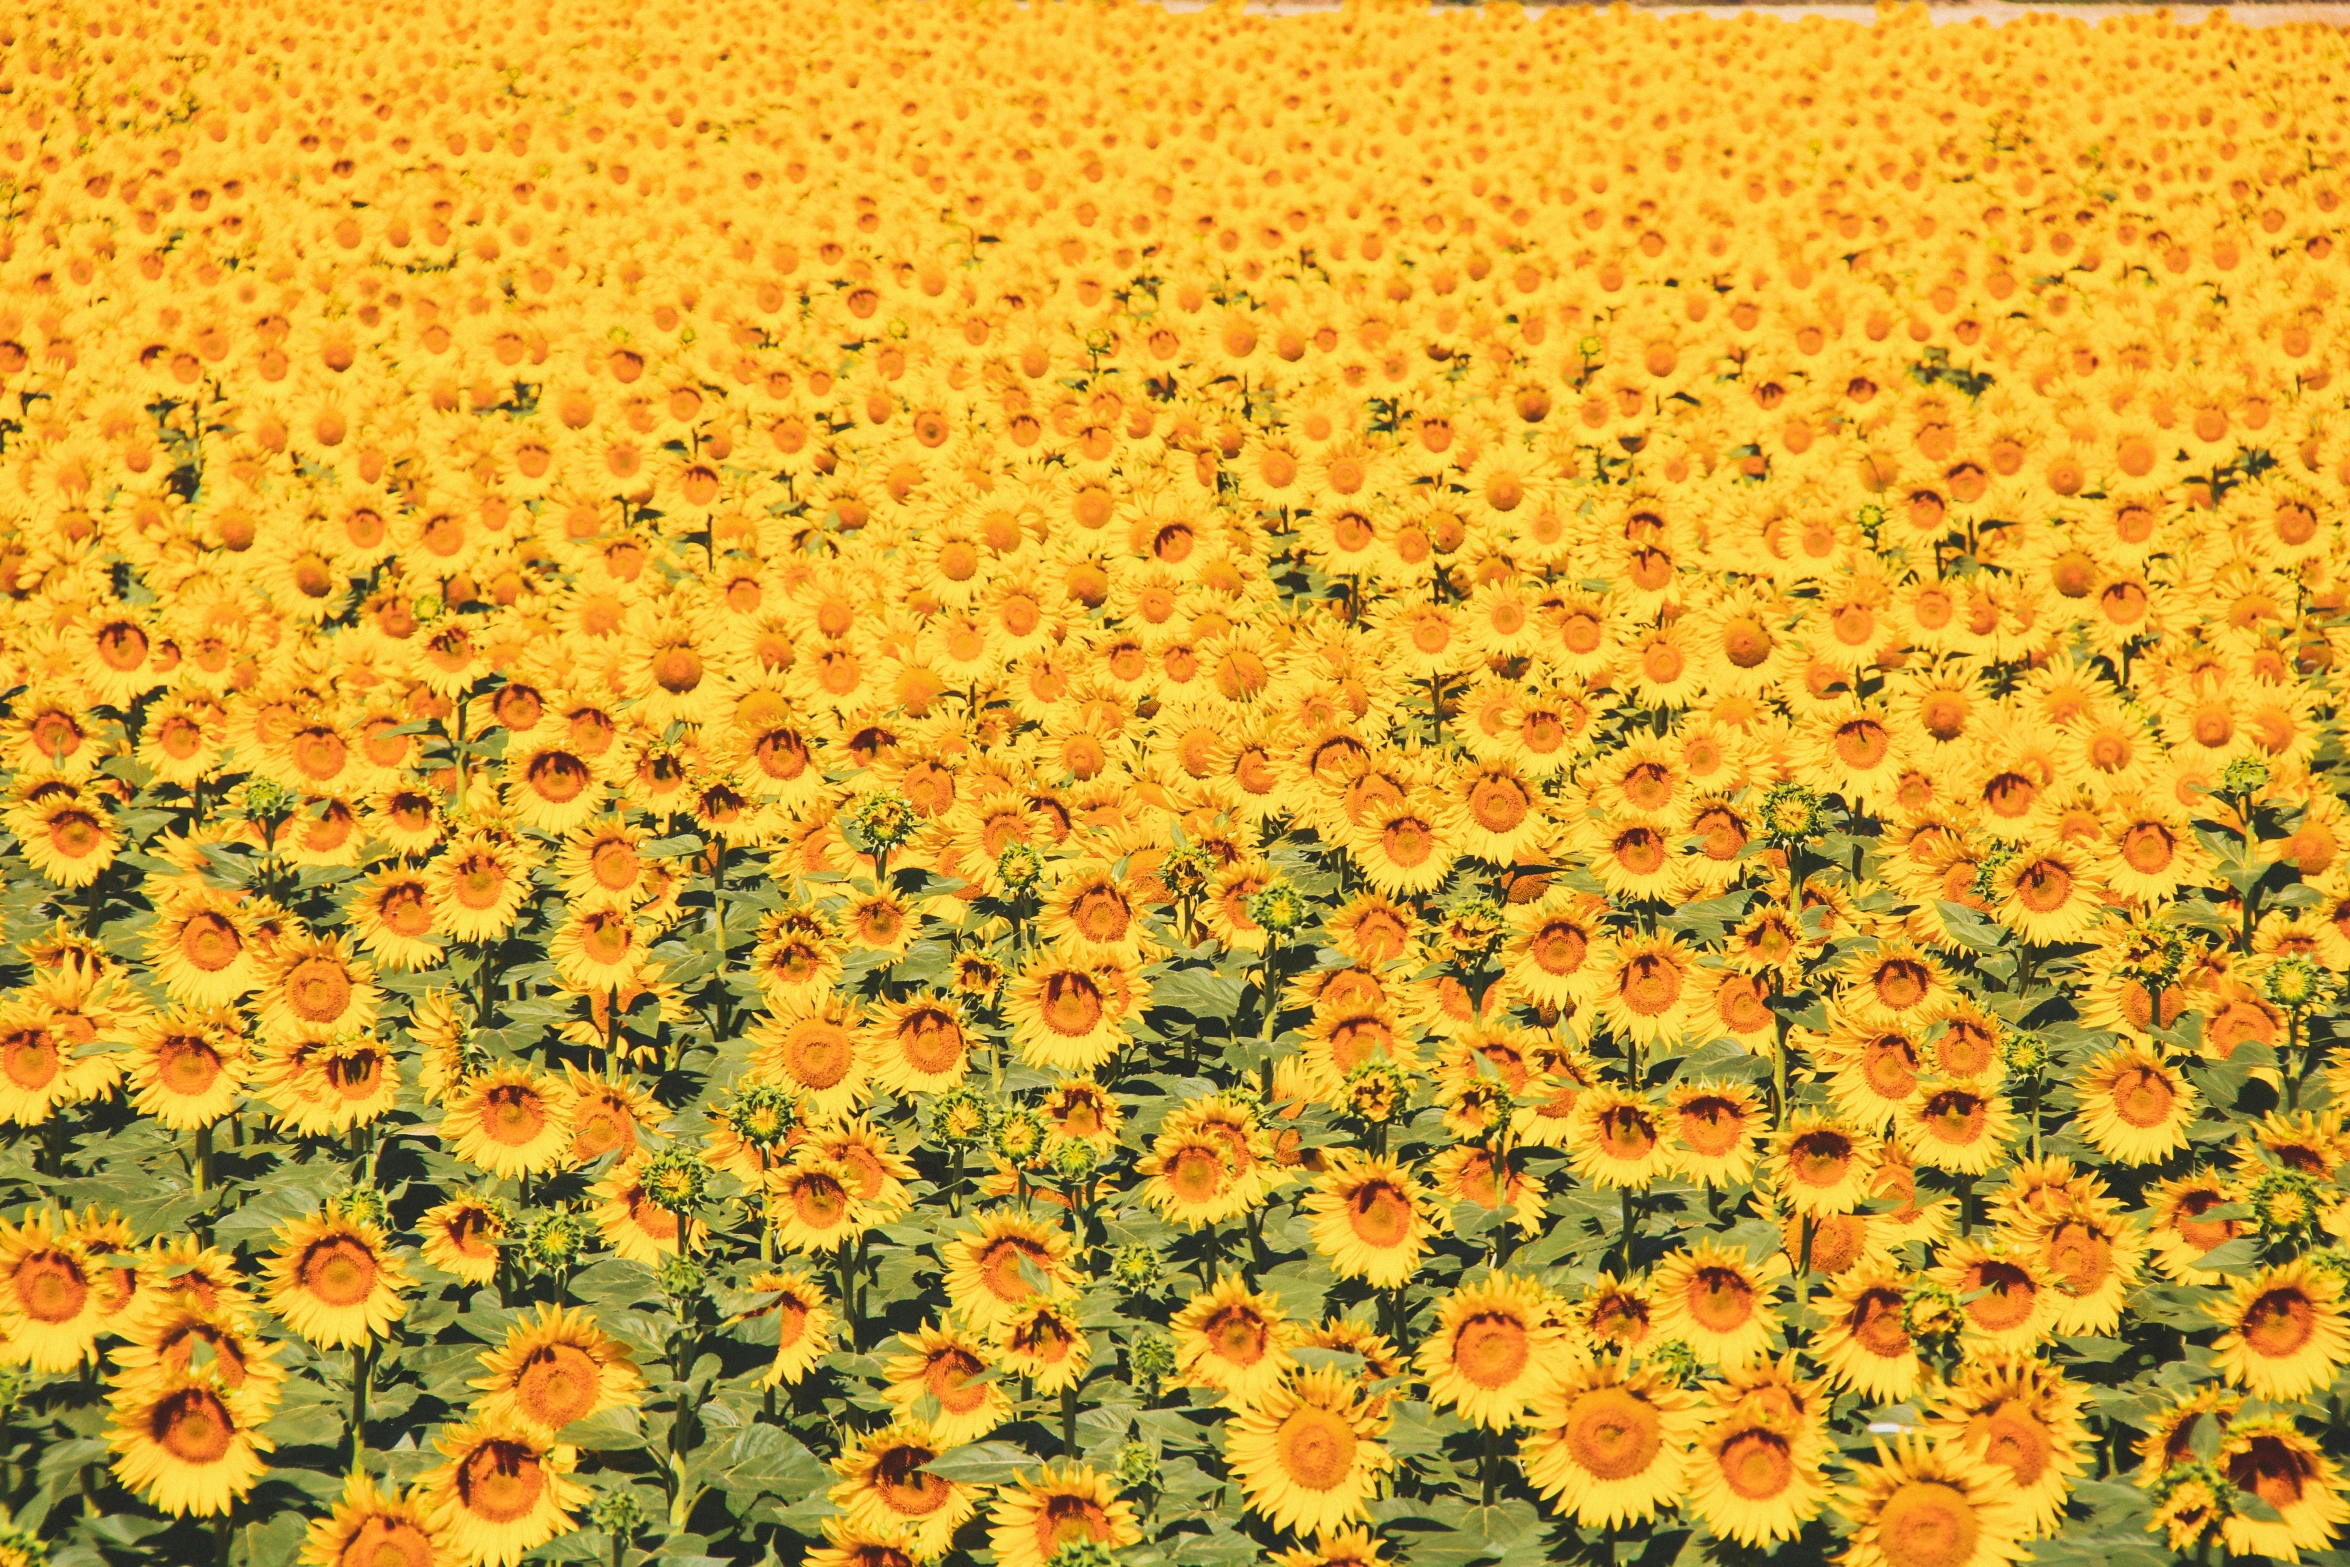 a large field of sunflowers sitting in a field